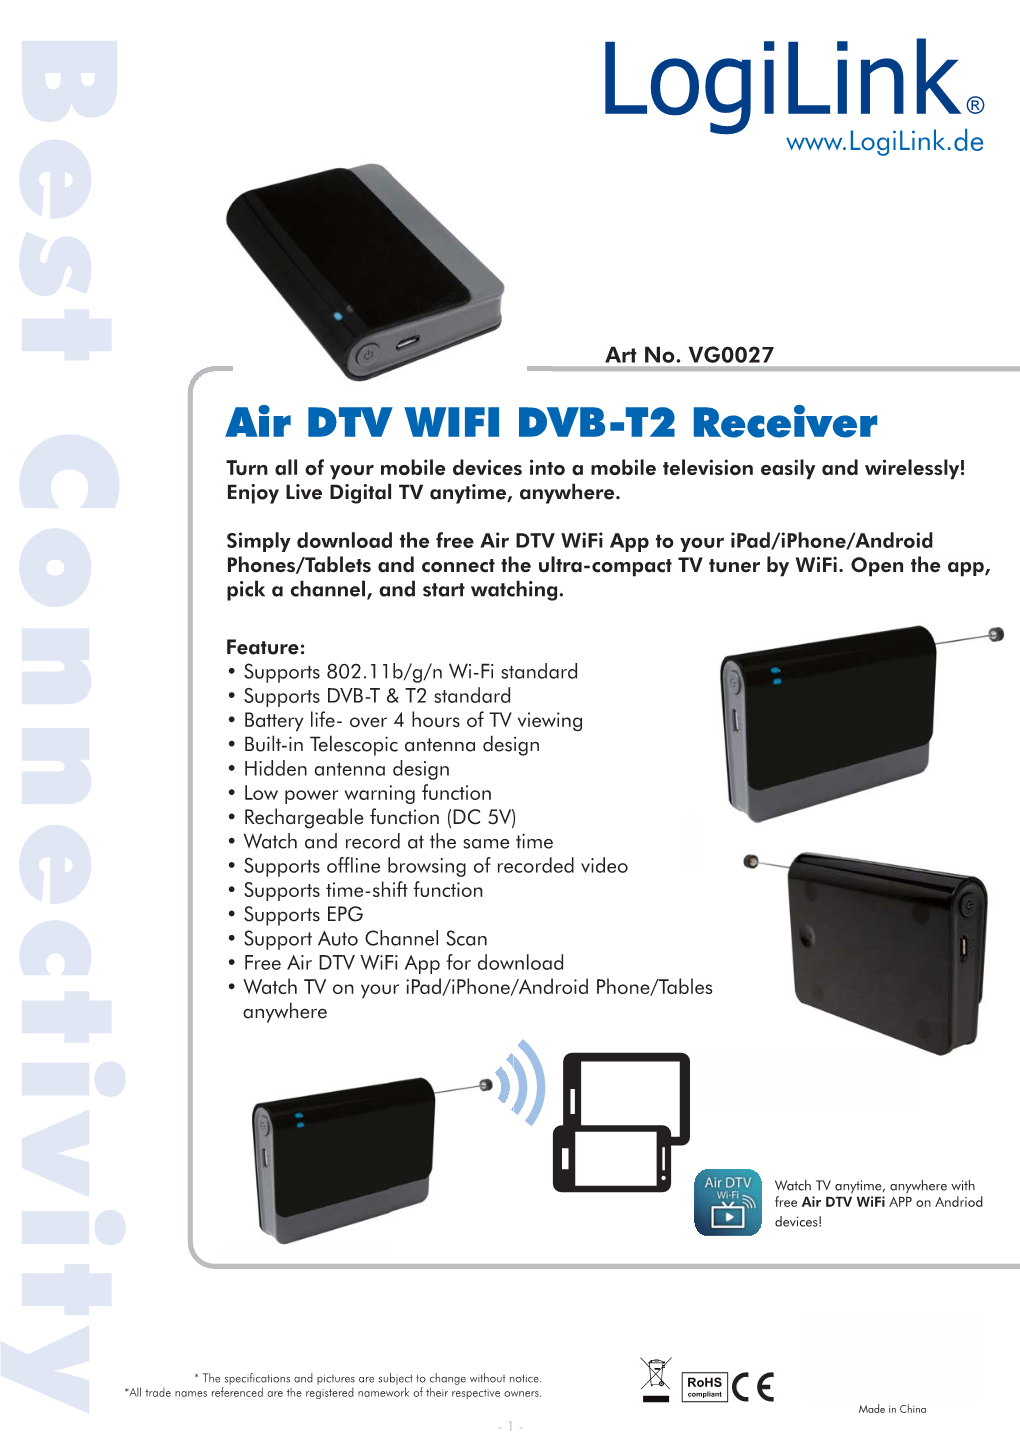 Air DTV WIFI DVB-T2 Receiver Receiver WIFI DVB-T2 Air DTV Wirelessly! Your Mobile Devices Into a Mobile Television Easily and All of Turn Anywhere